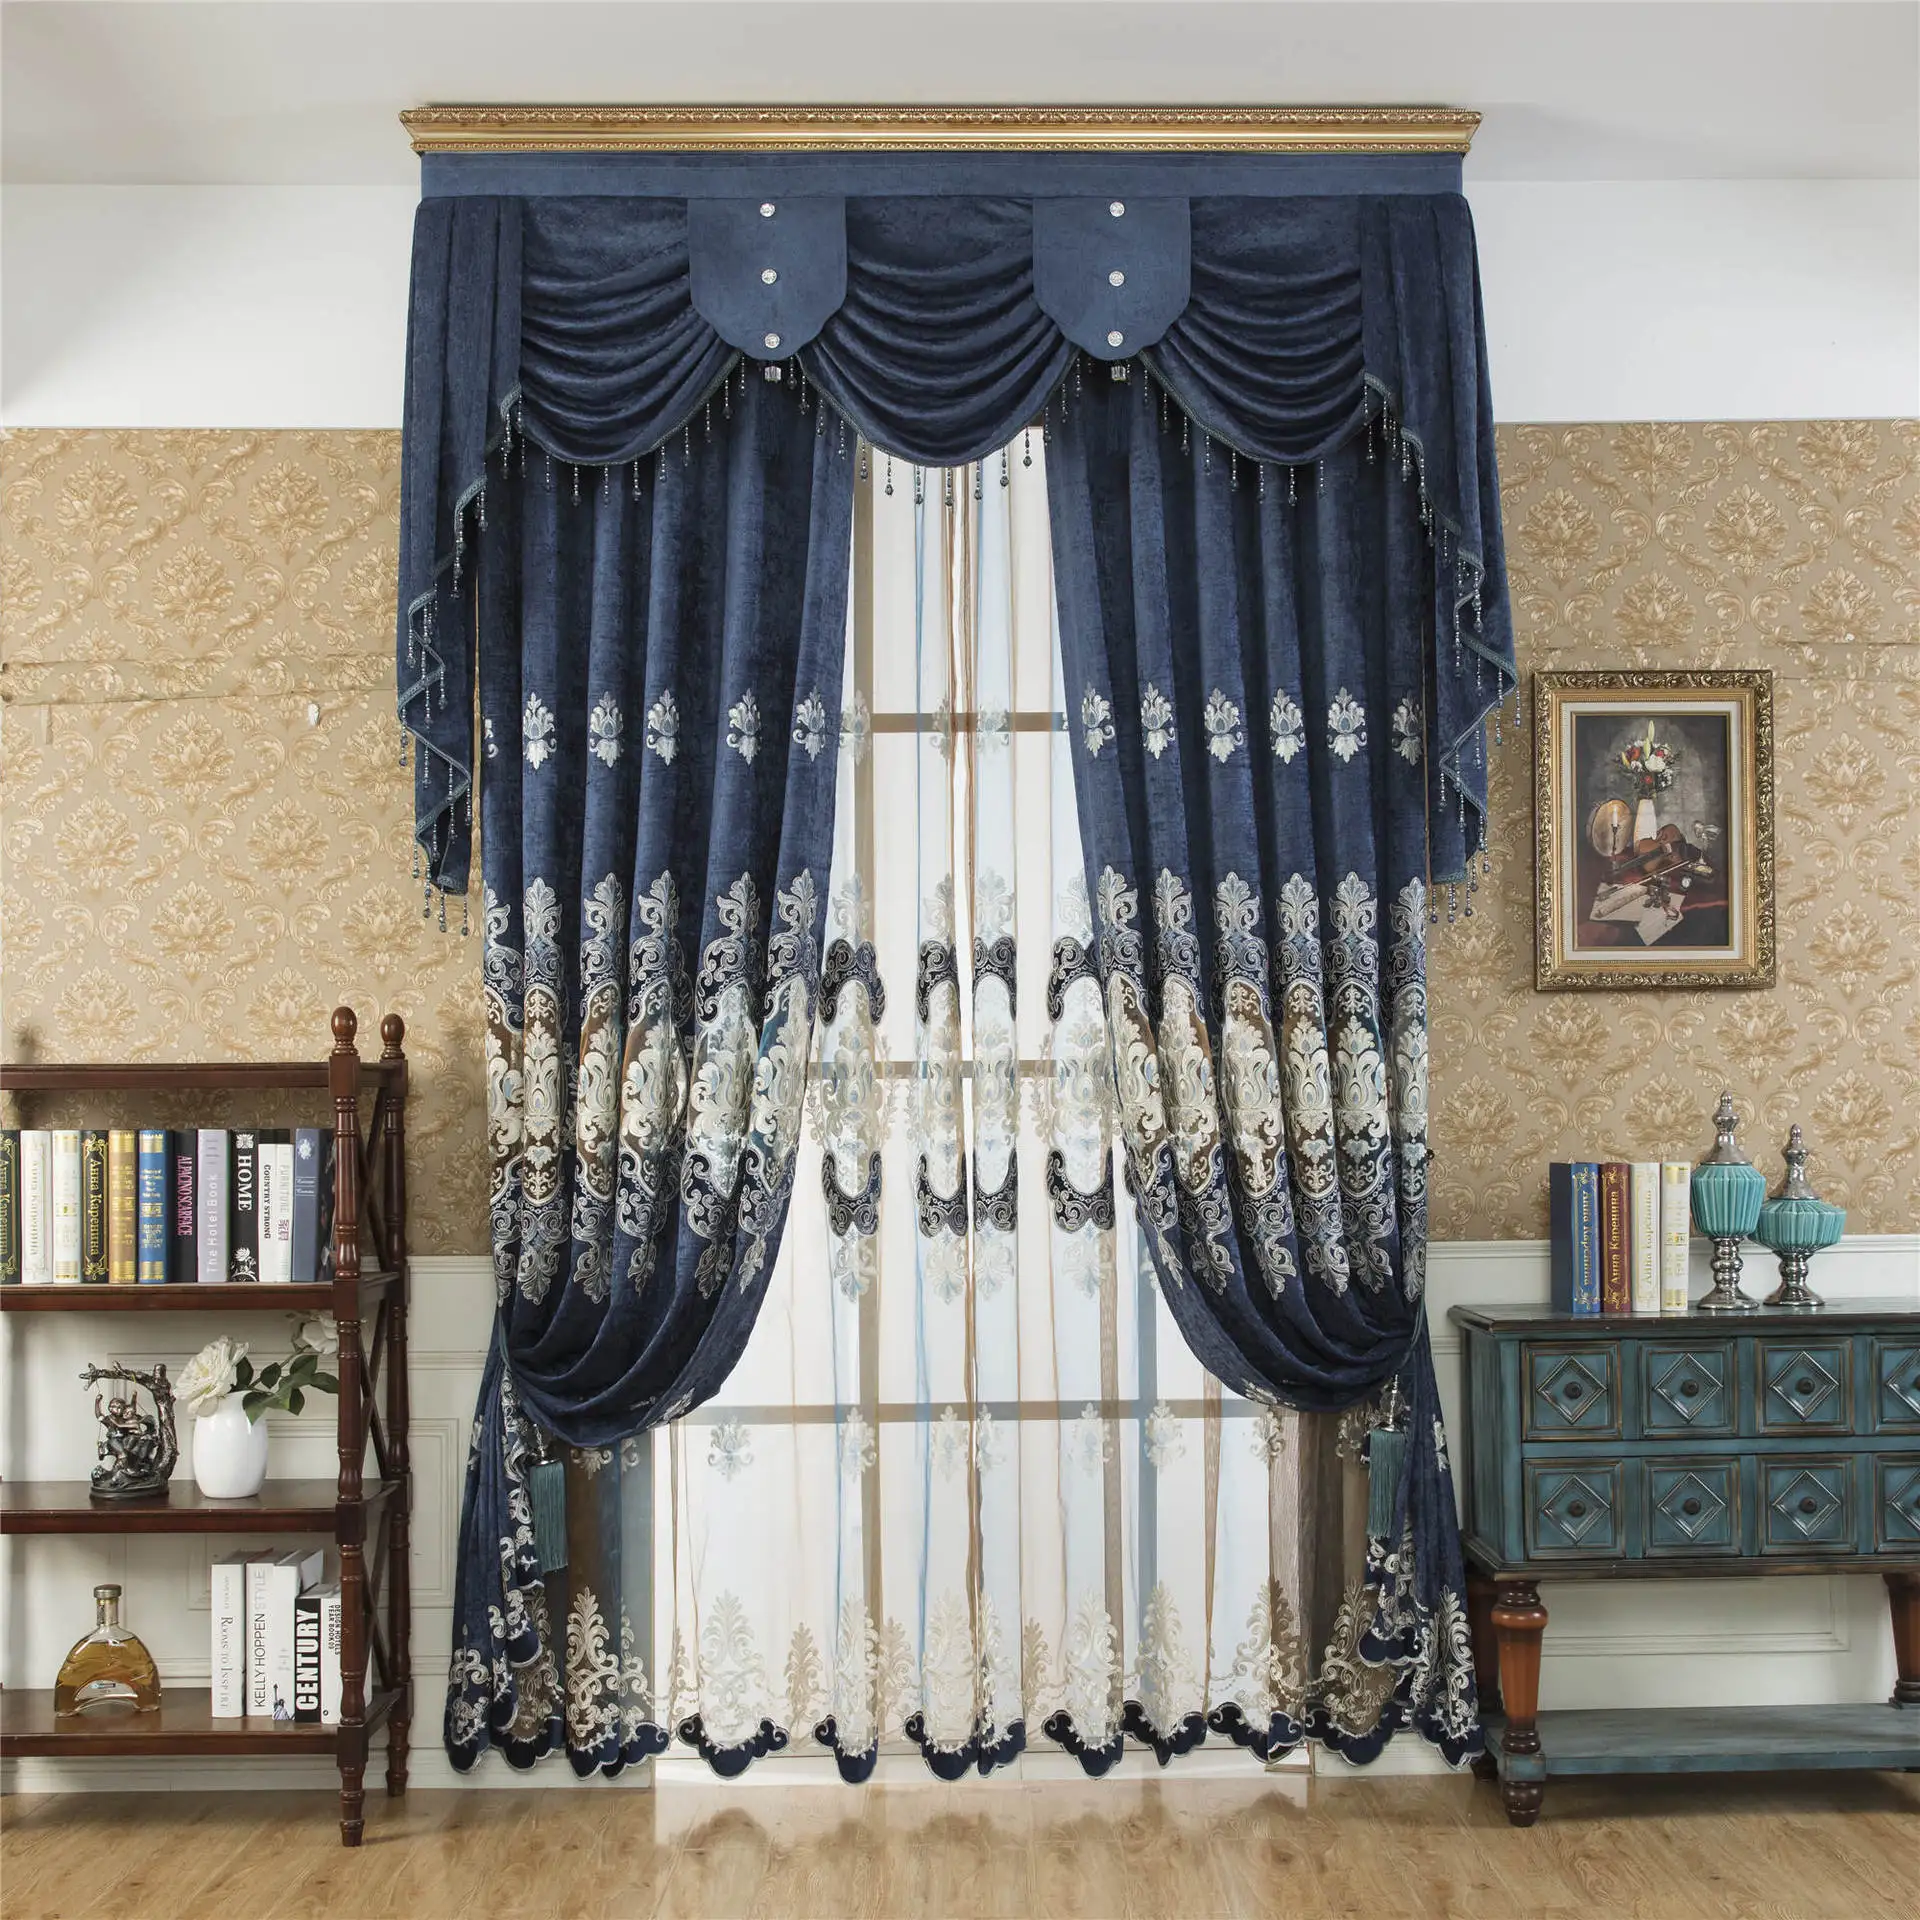 2022 New Hollow Shading Embroidery Curtains for Living Dining Room Bedroom